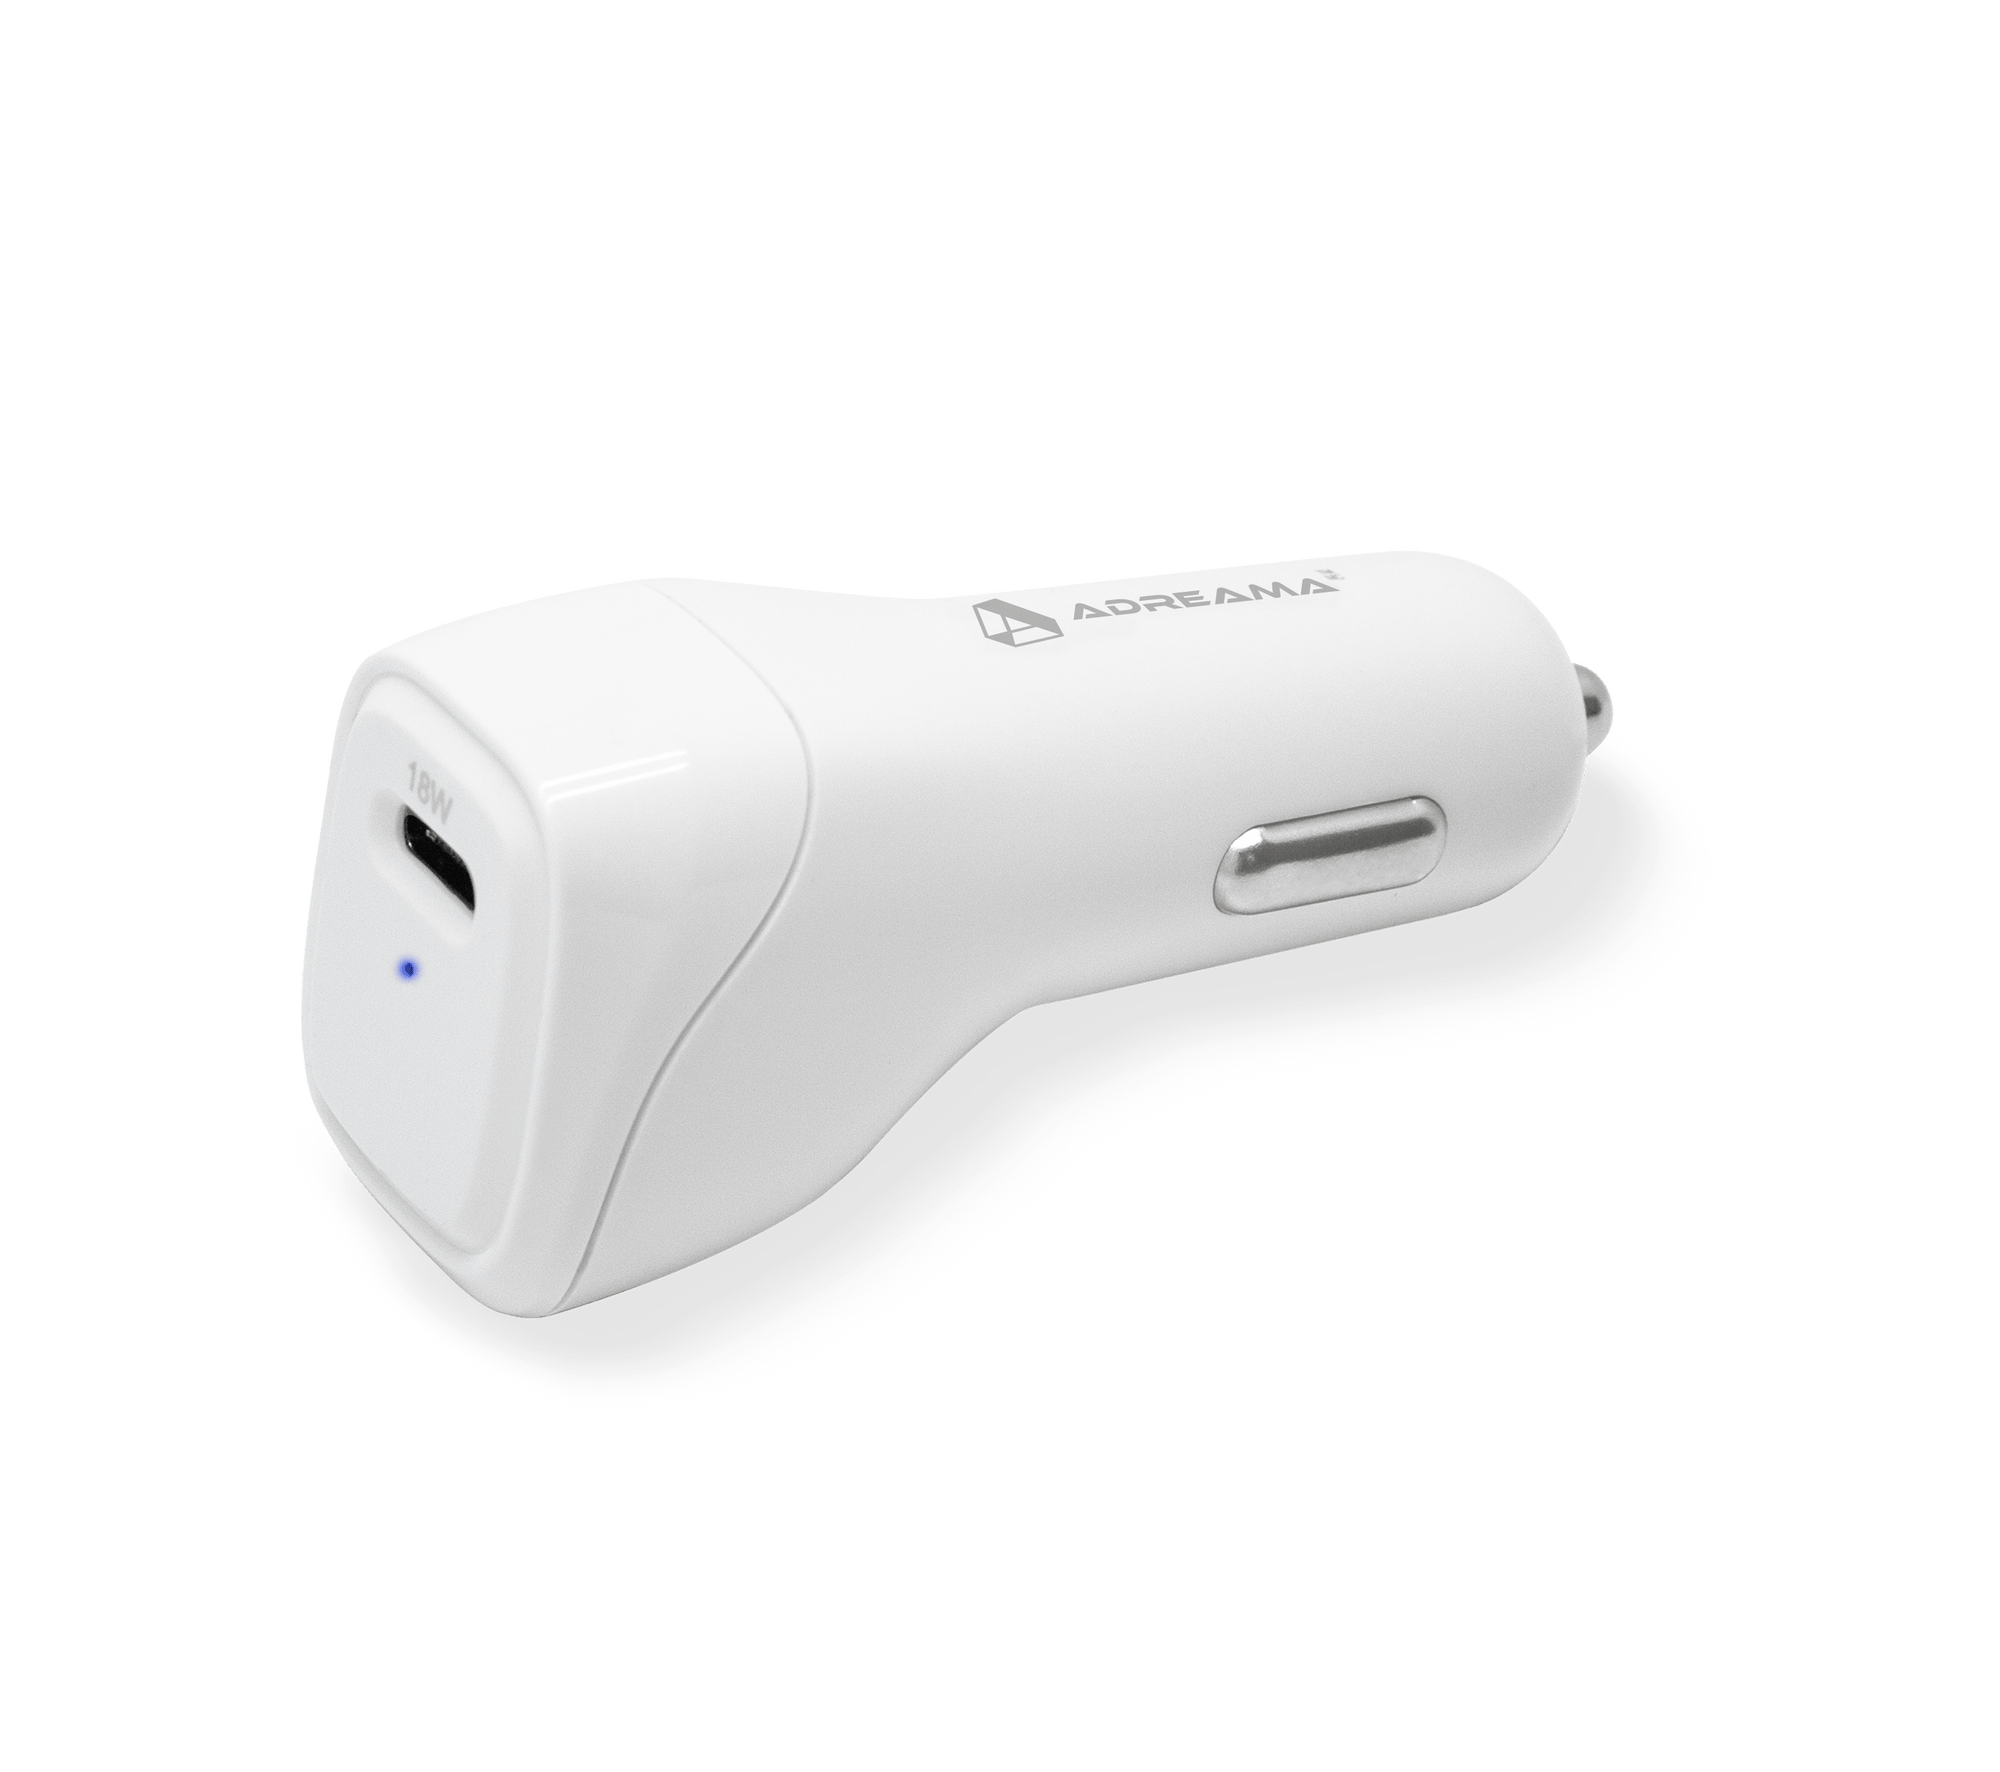 Maximize Your Device's Charging Speed with the Adreama PD 18W Car Charger